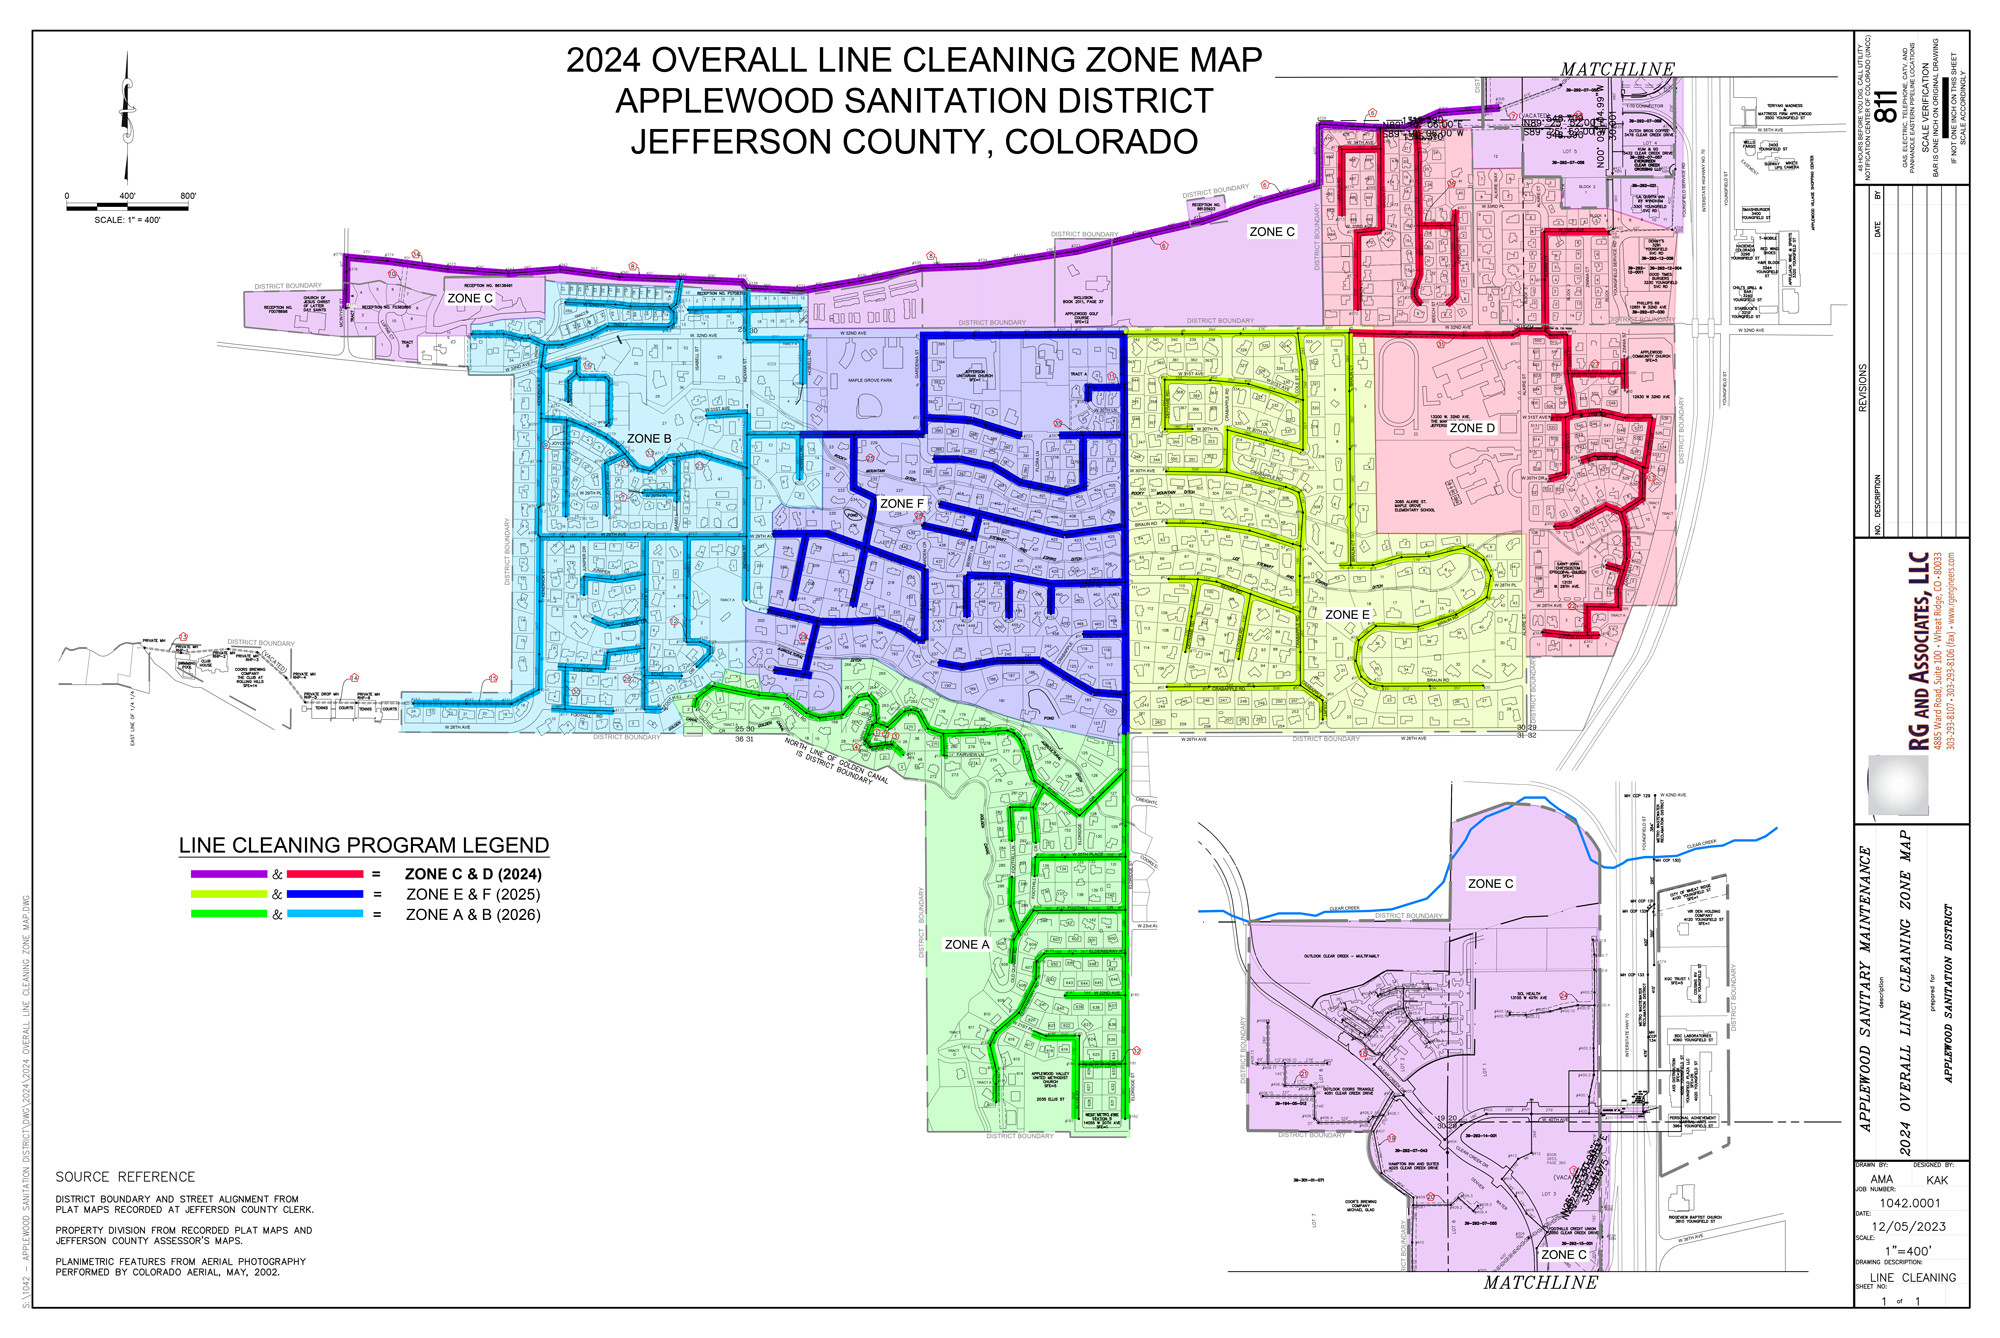 2024 Overall Line Cleaning Zone Map